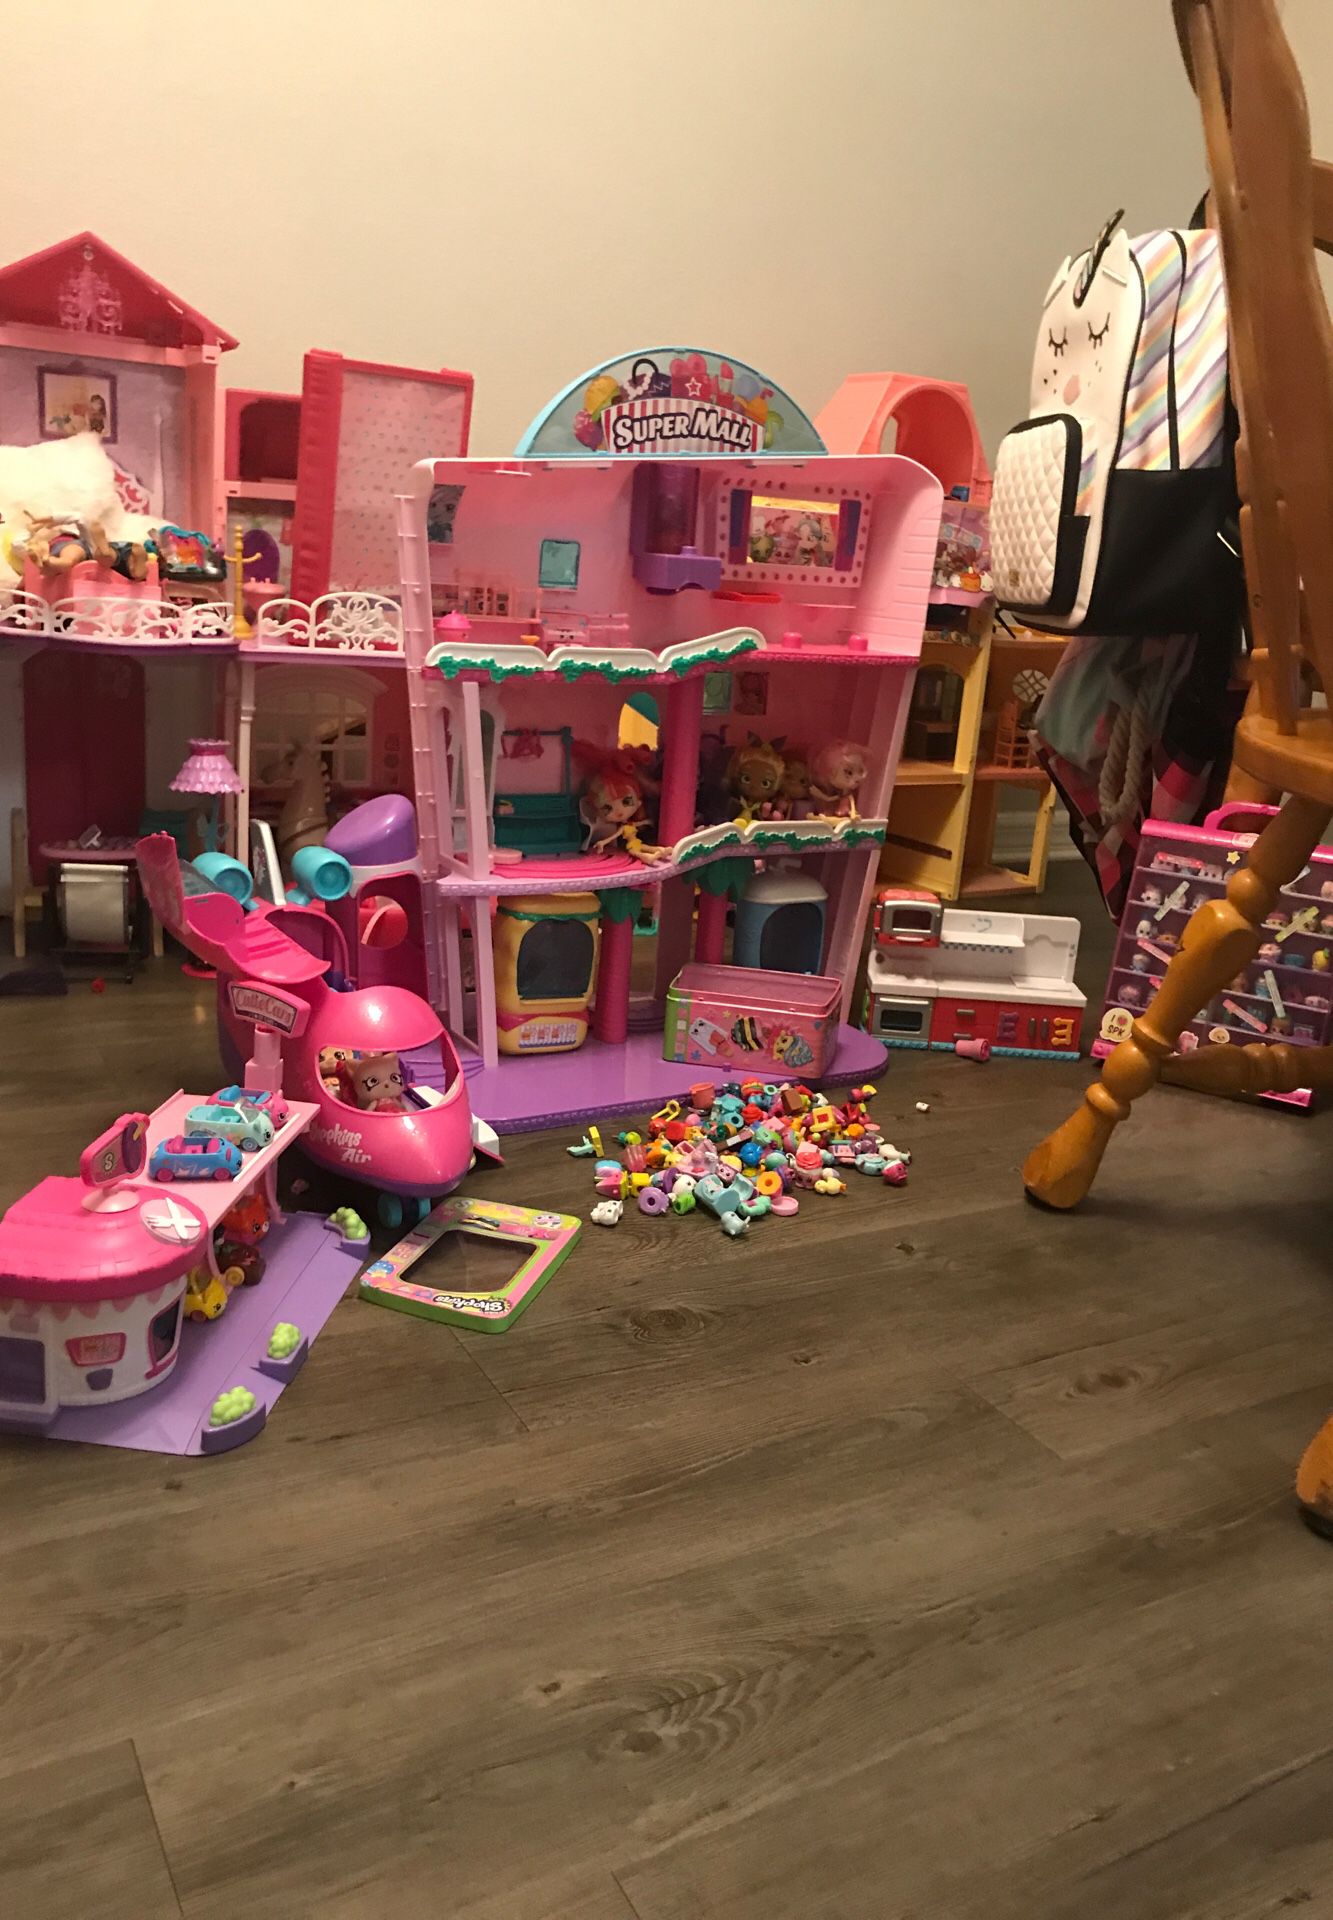 Shopkins mall,and other shopkins items largo flordia